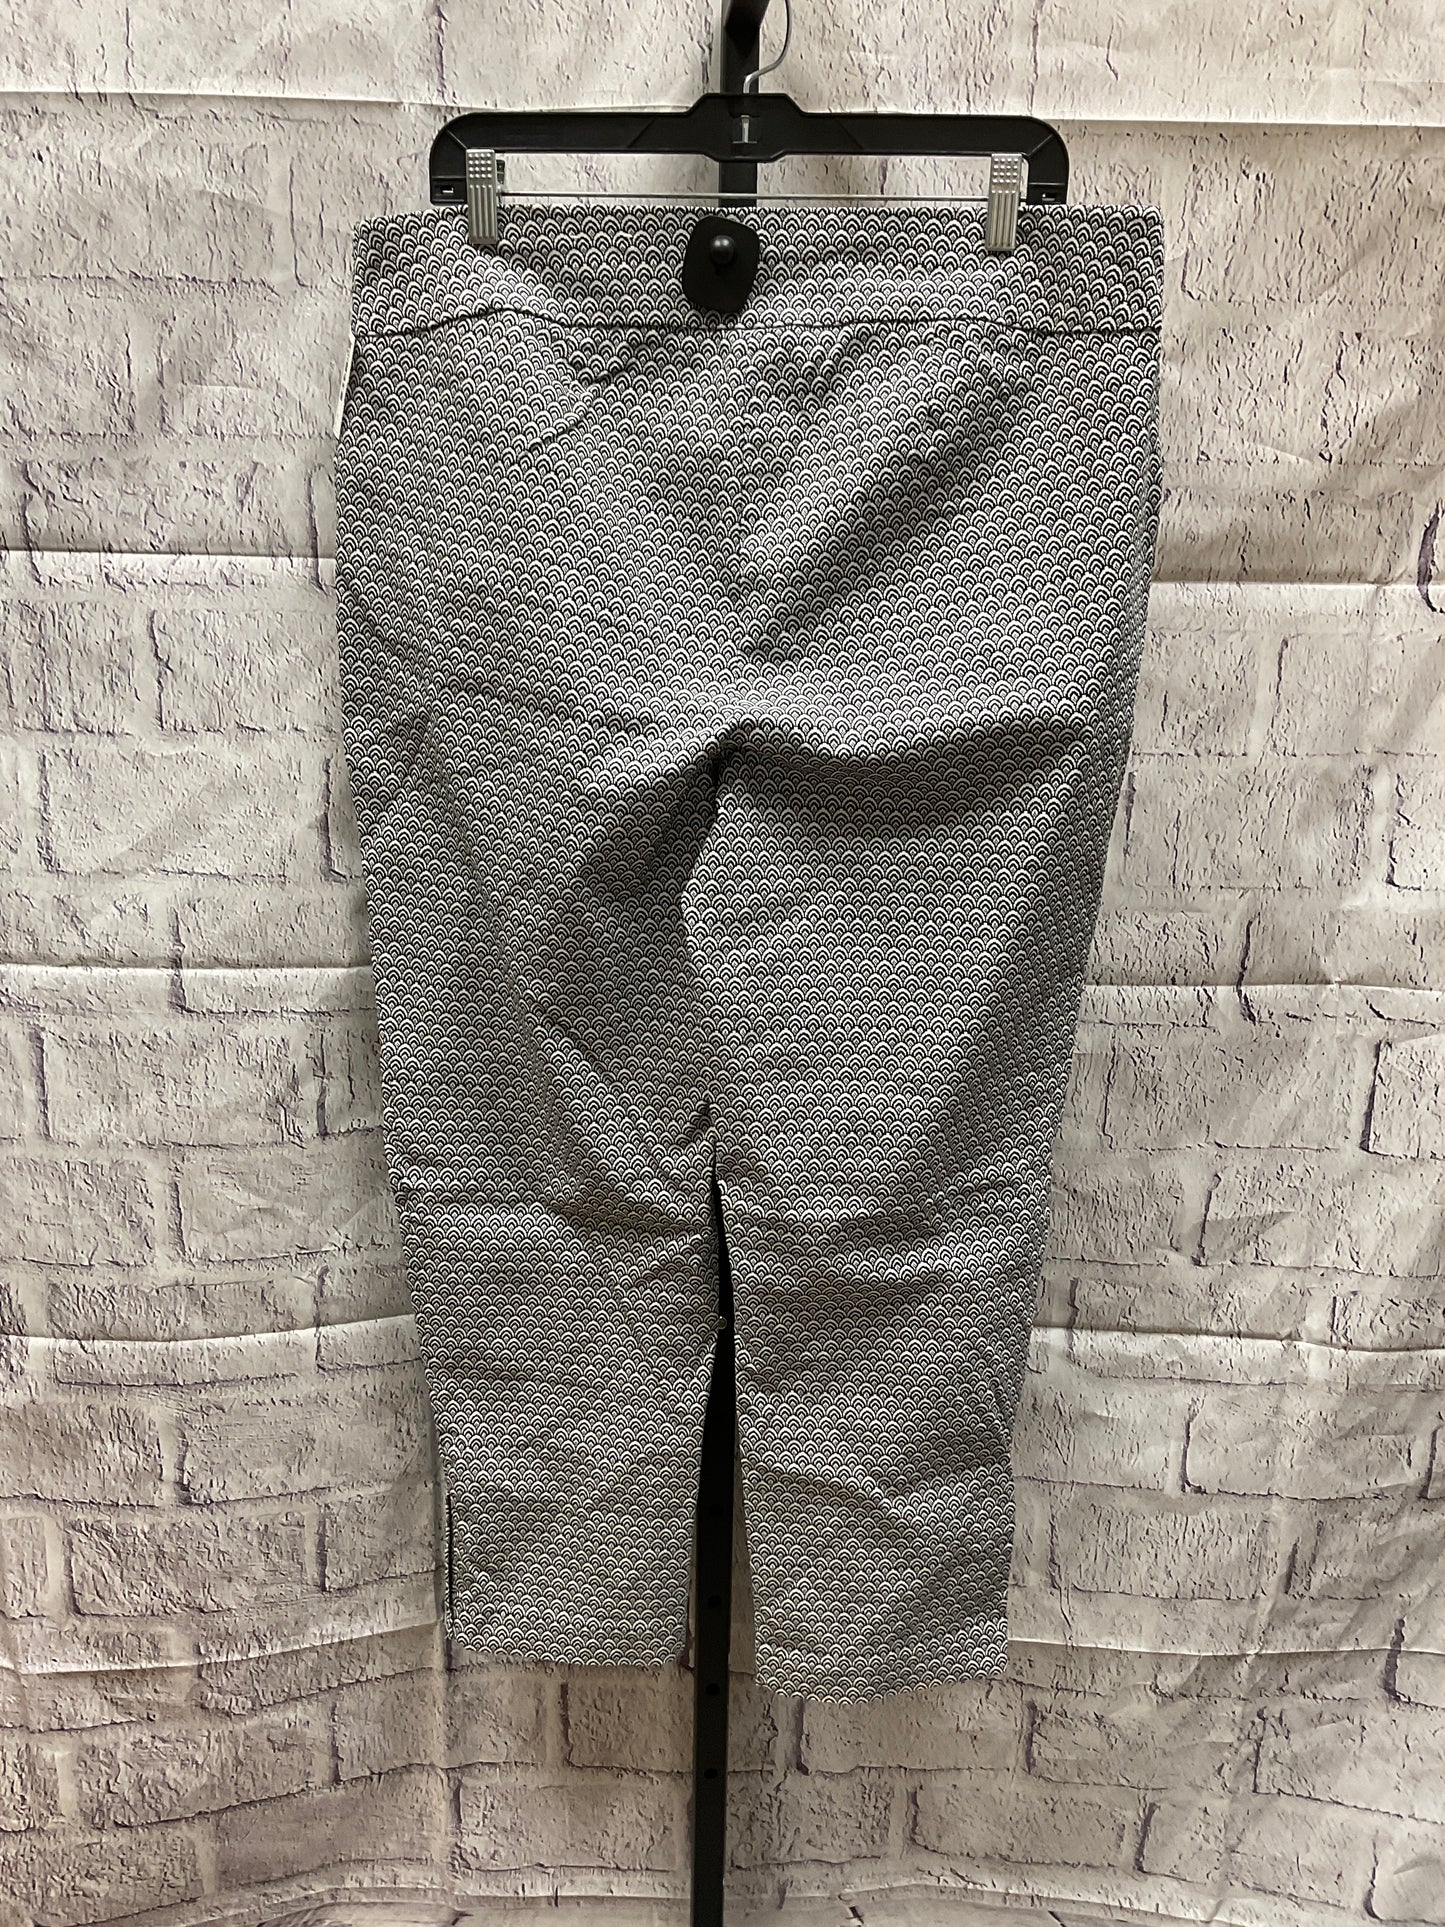 Pants Chinos & Khakis By Chicos  Size: 16